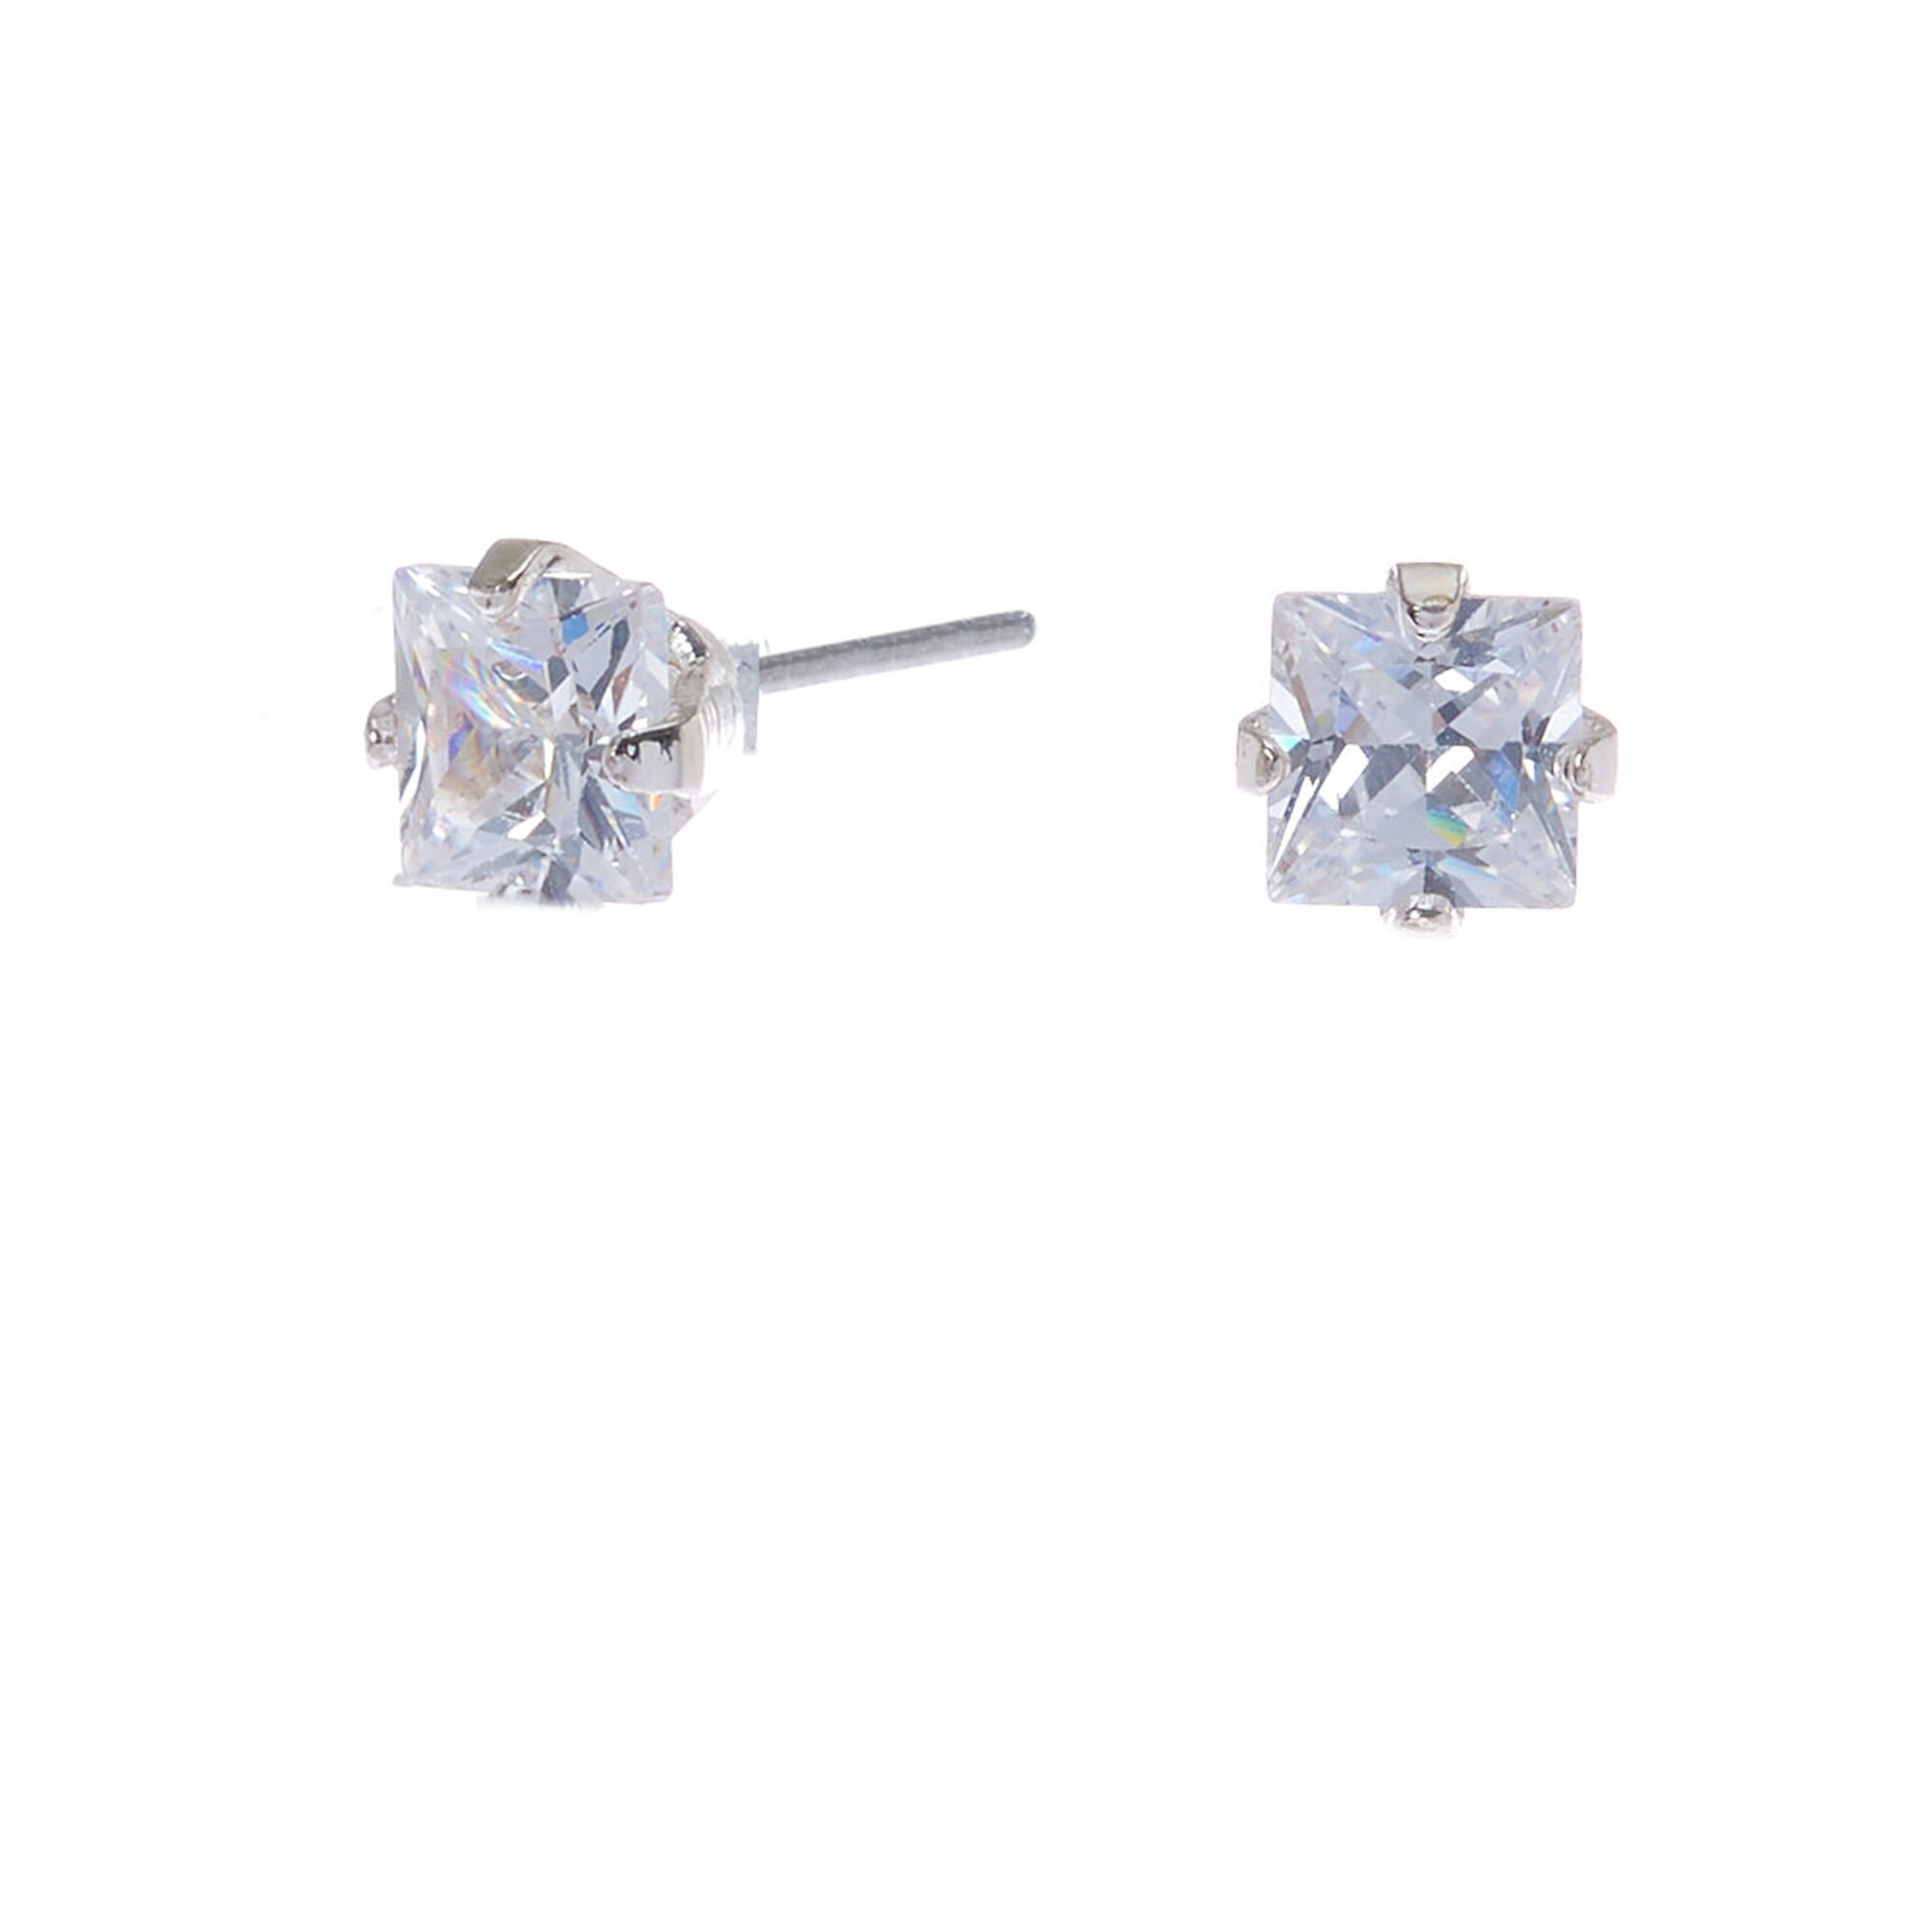 View Claires Tone Cubic Zirconia Square Stud Earrings 4MM Silver information